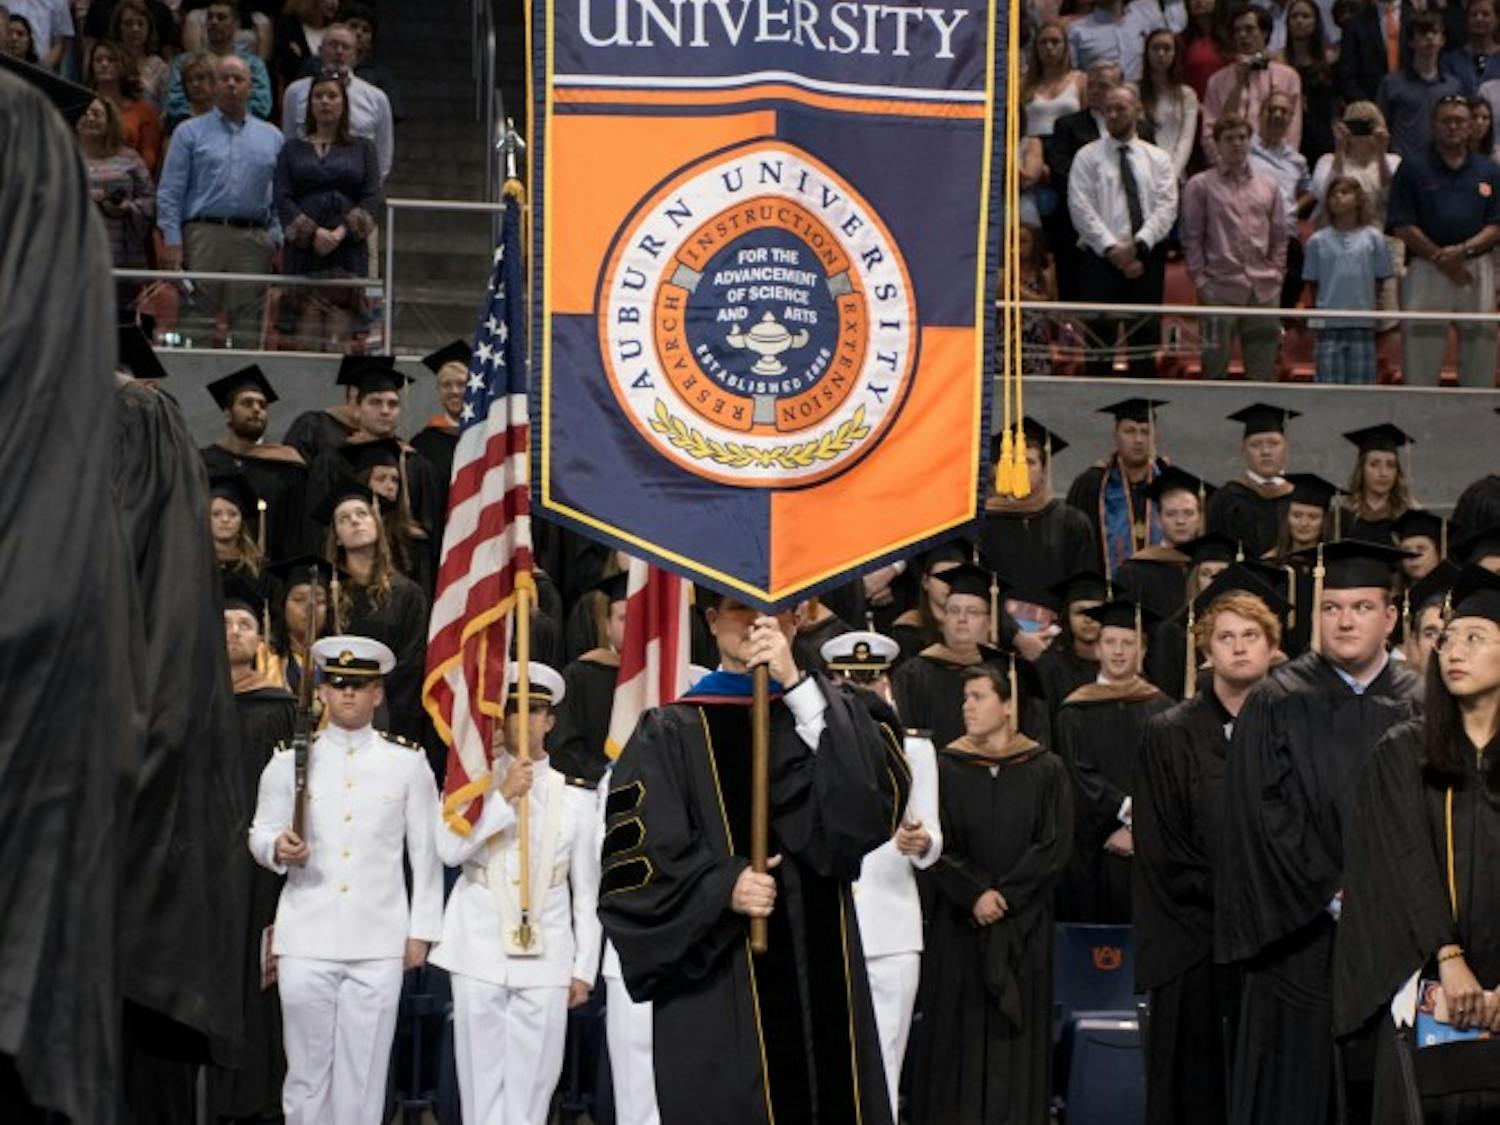 The processional begins at the graduation ceremony on Sunday, May 6, 2018, in Auburn, Ala.